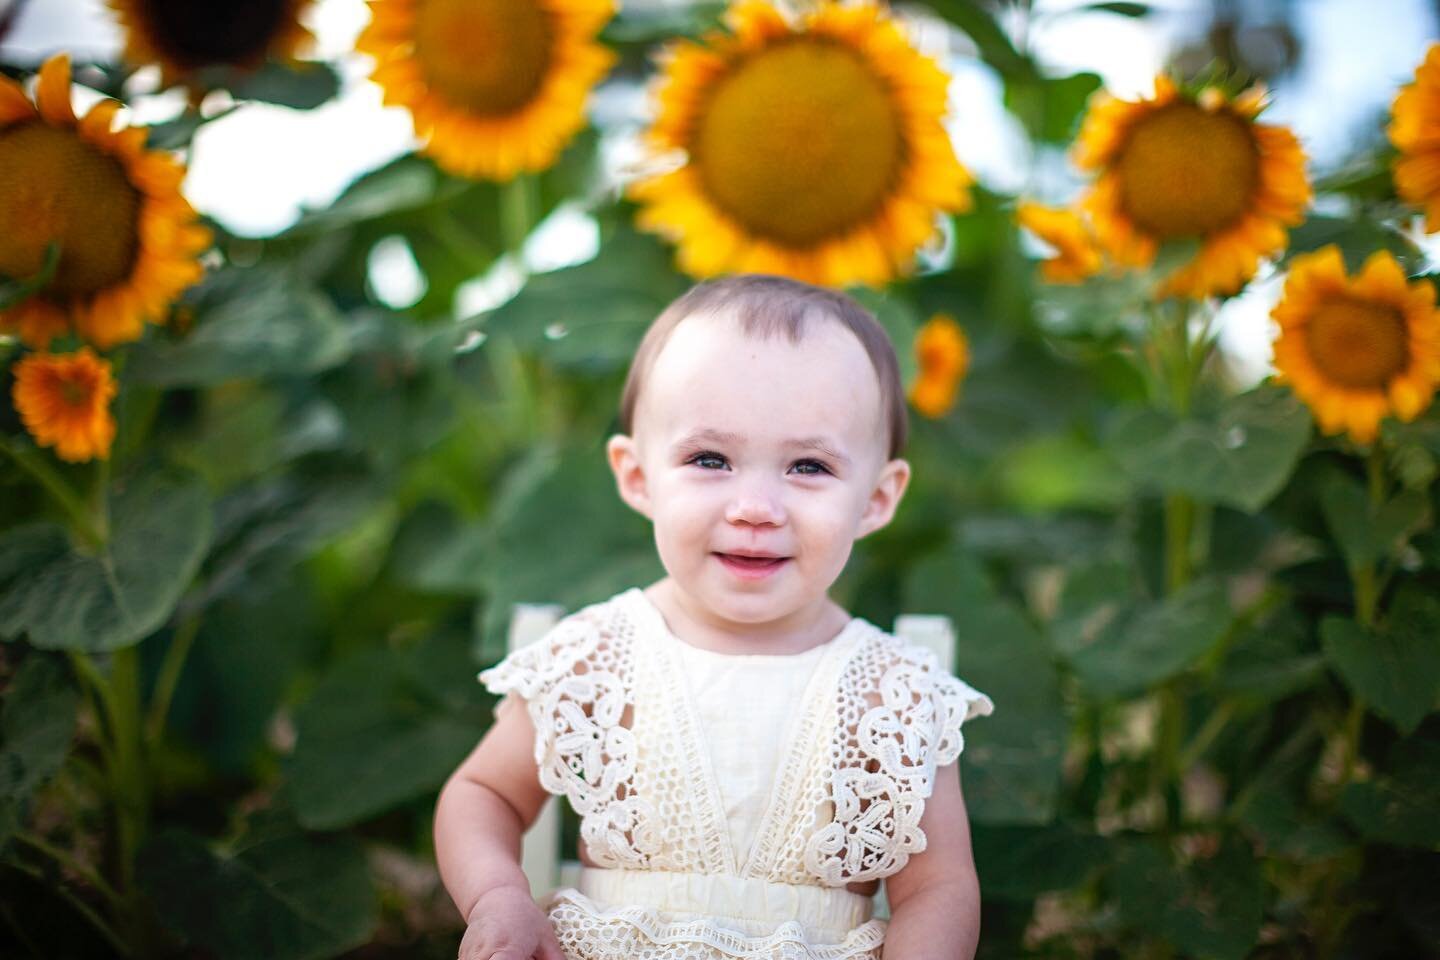 Denise&rsquo;s baby girl amongst the sunflowers of @rocker7farmpatch . Scroll to see baby girl&rsquo;s parents and then count how many people you see in the backgrounds of the photos! 

Zero?? Yay! All the people were removed with @photoshop &lsquo;s